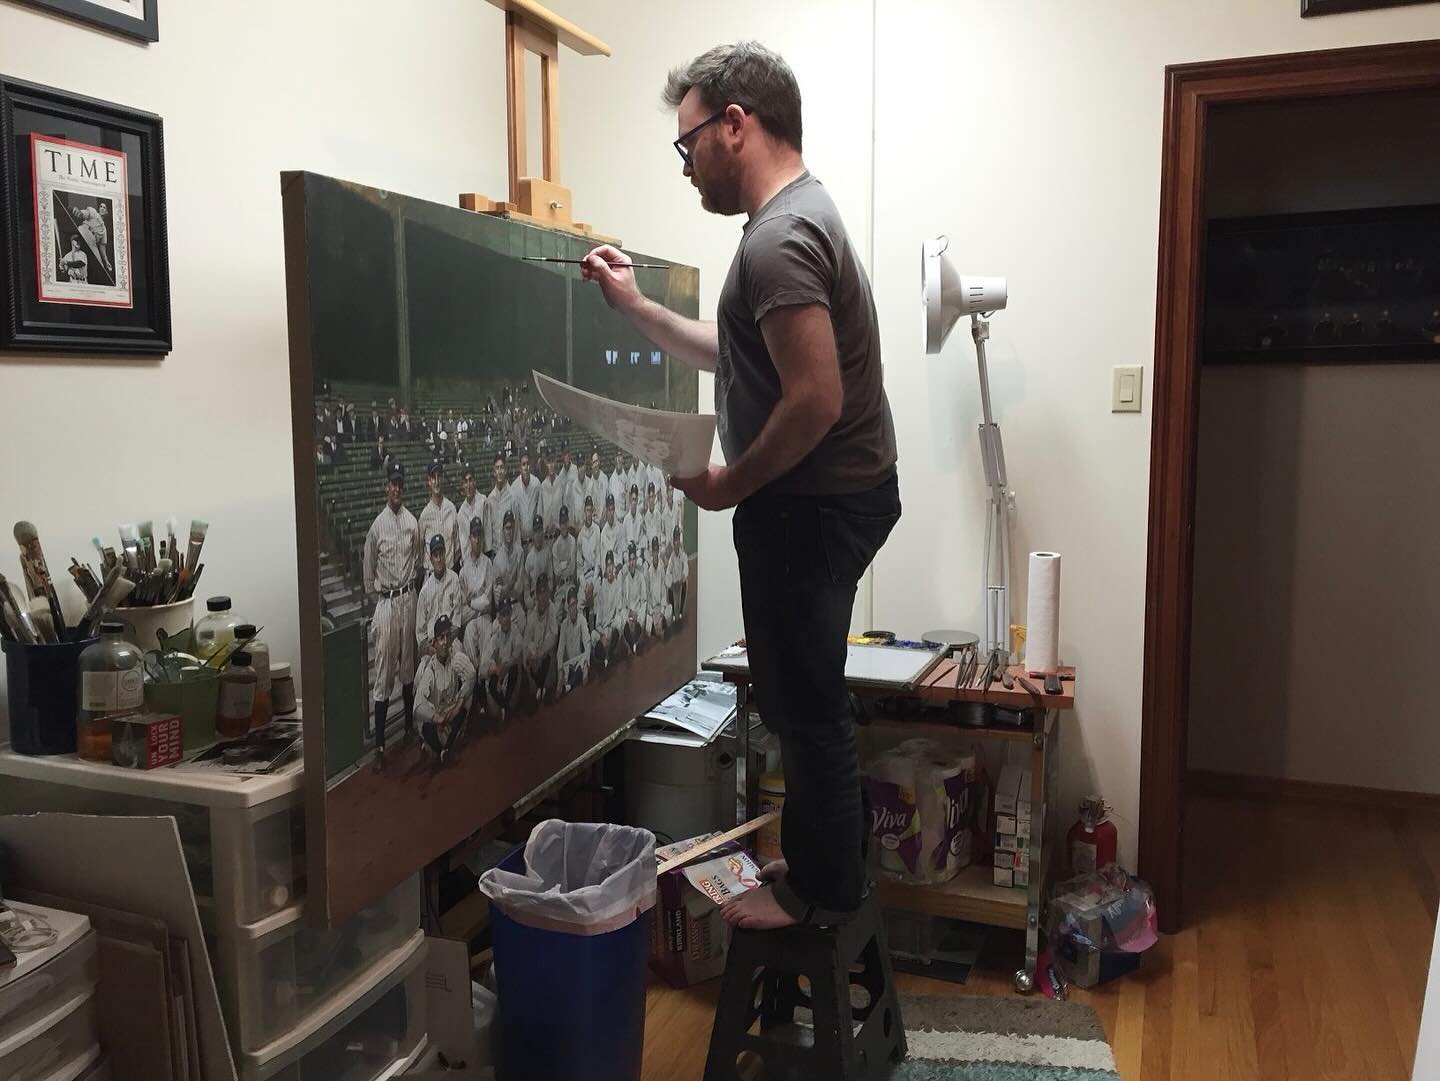 Throwback to when I was standing on stools to get to the top of my paintings. Because I was short.*

* - I still stand on stools to get to the top of my paintings. Because I&rsquo;m still short.

#baseballart